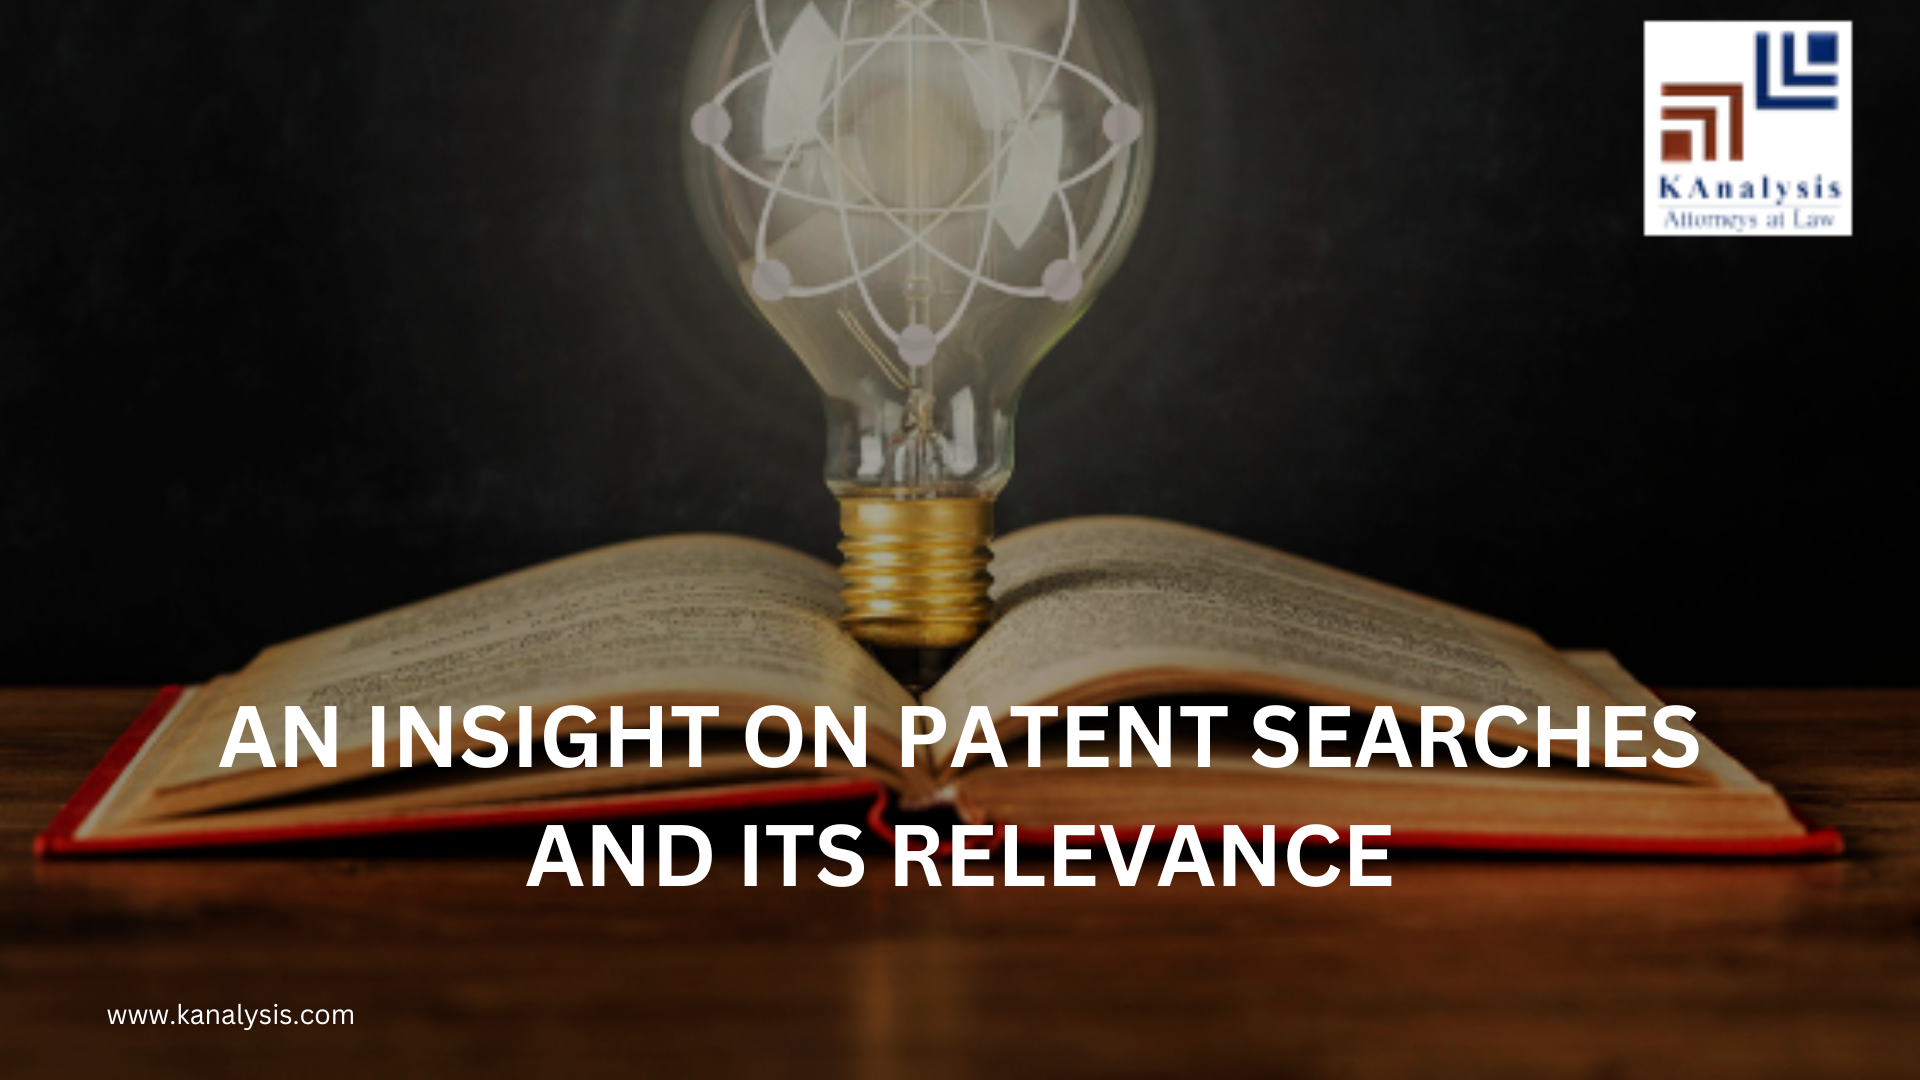 AN INSIGHT ON PATENT SEARCHES AND ITS RELEVANCE